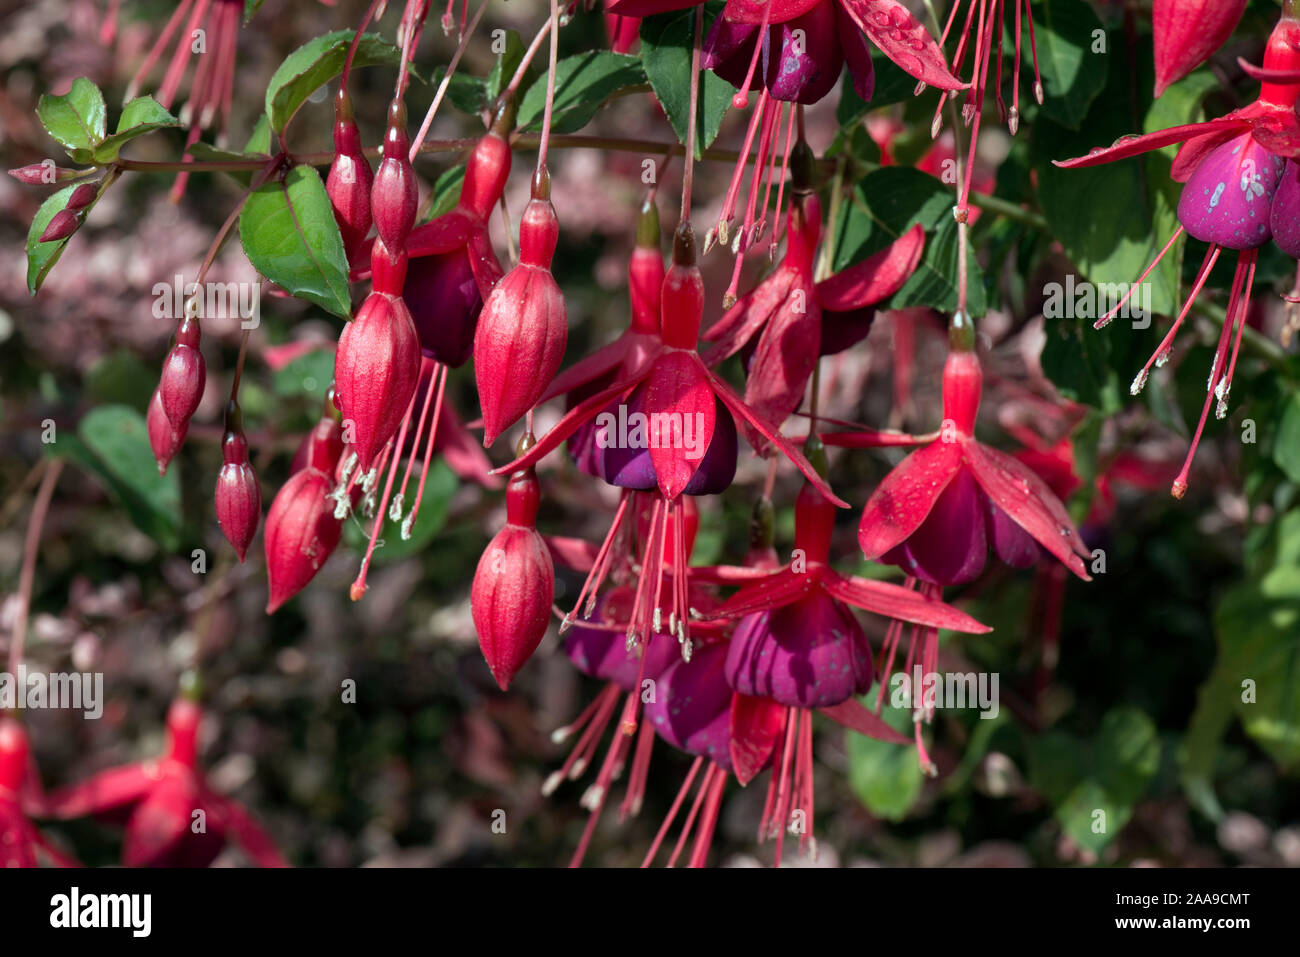 Flowering fuschia shrub with bright pendulous red and purple hanging flowers with anthers and style extended beyond the corolla, September Stock Photo